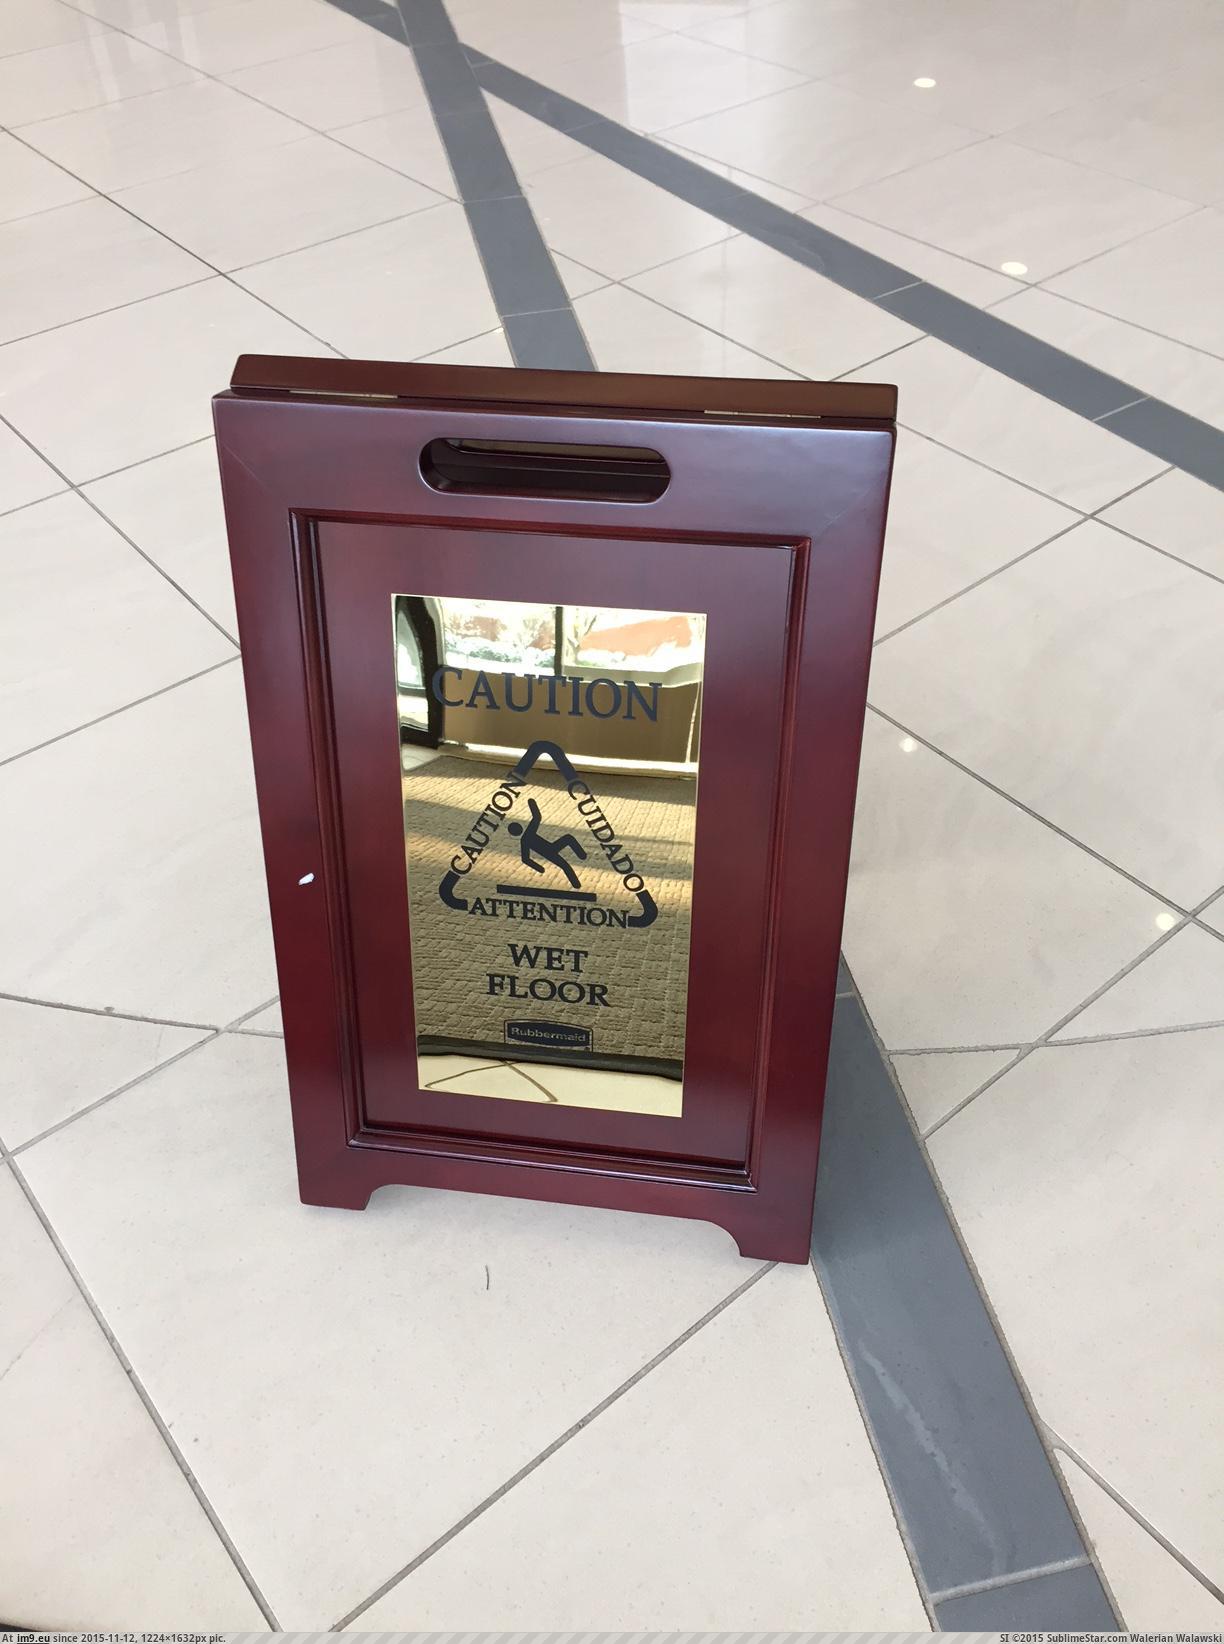 [Mildlyinteresting] This is the classiest, most luxurious Wet Floor sign I've ever seen (in My r/MILDLYINTERESTING favs)